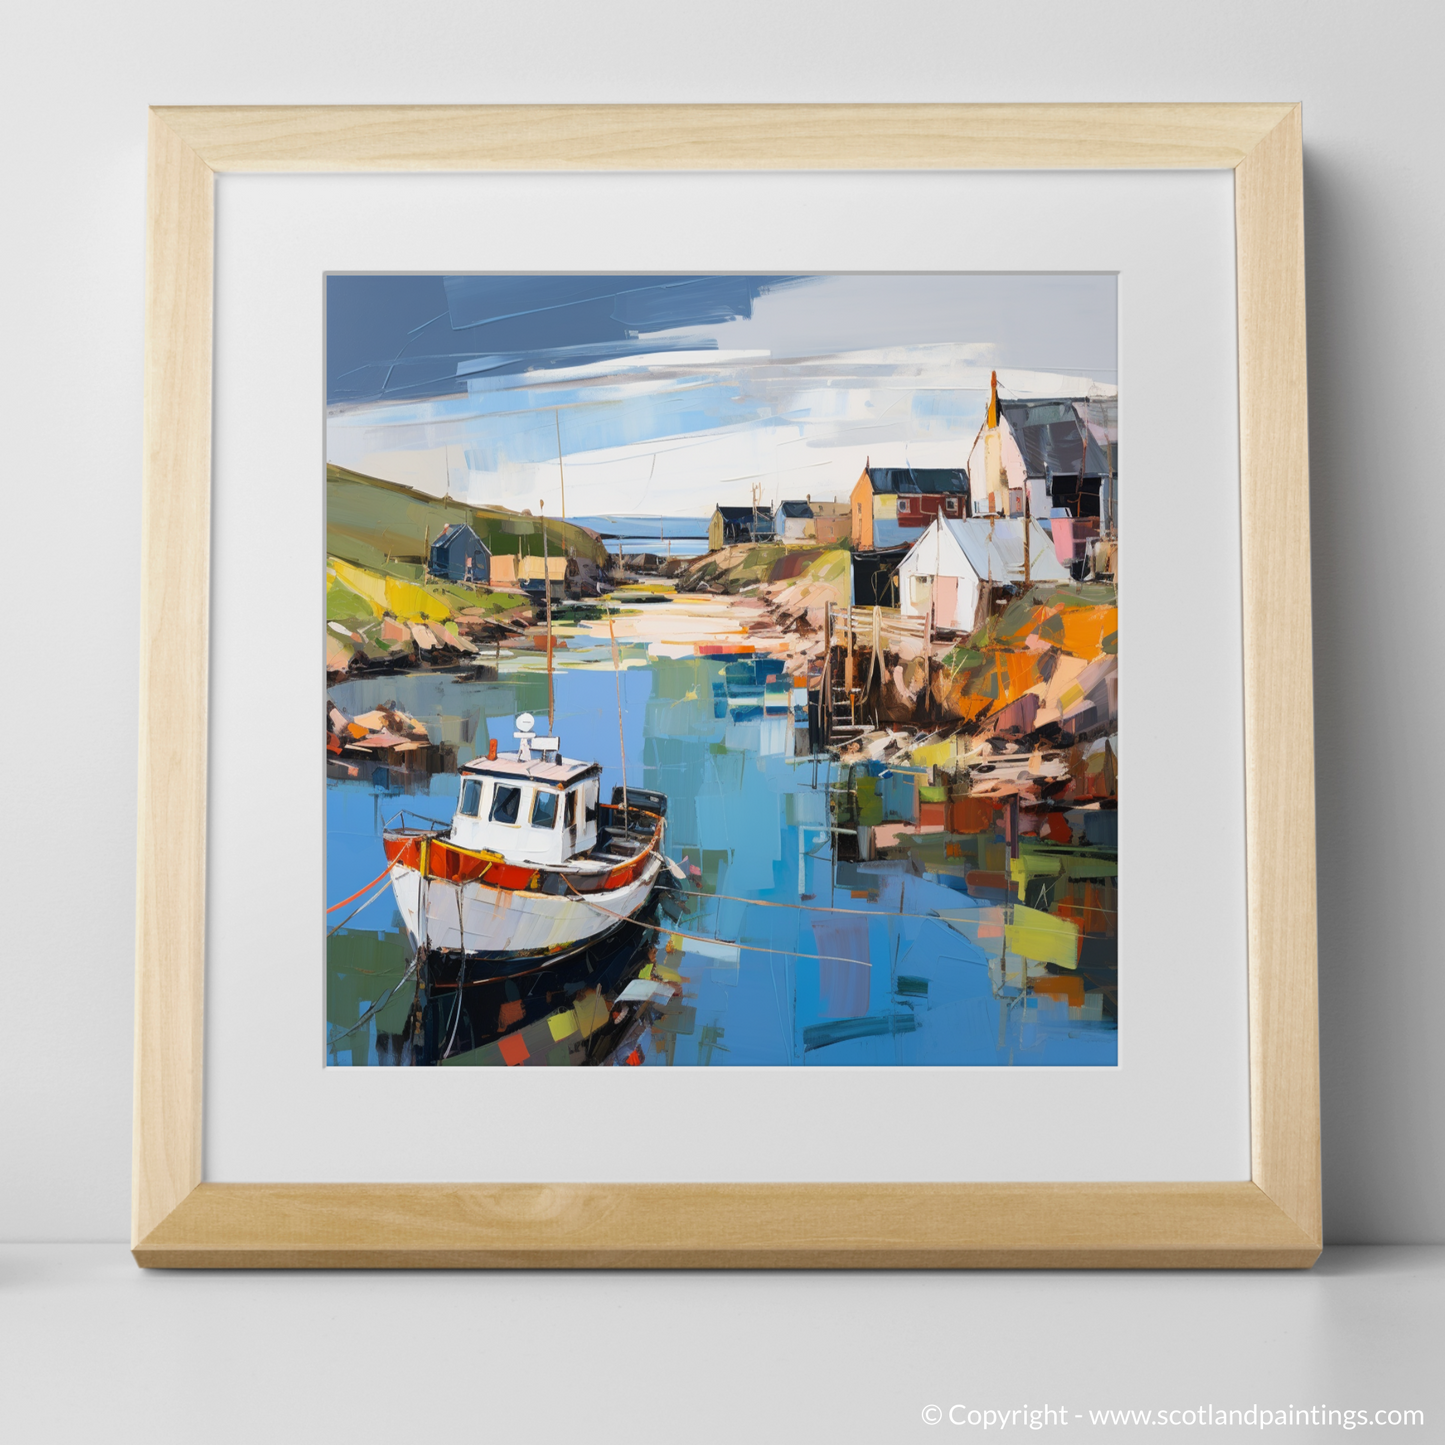 Art Print of Whitehills Harbour, Aberdeenshire with a natural frame